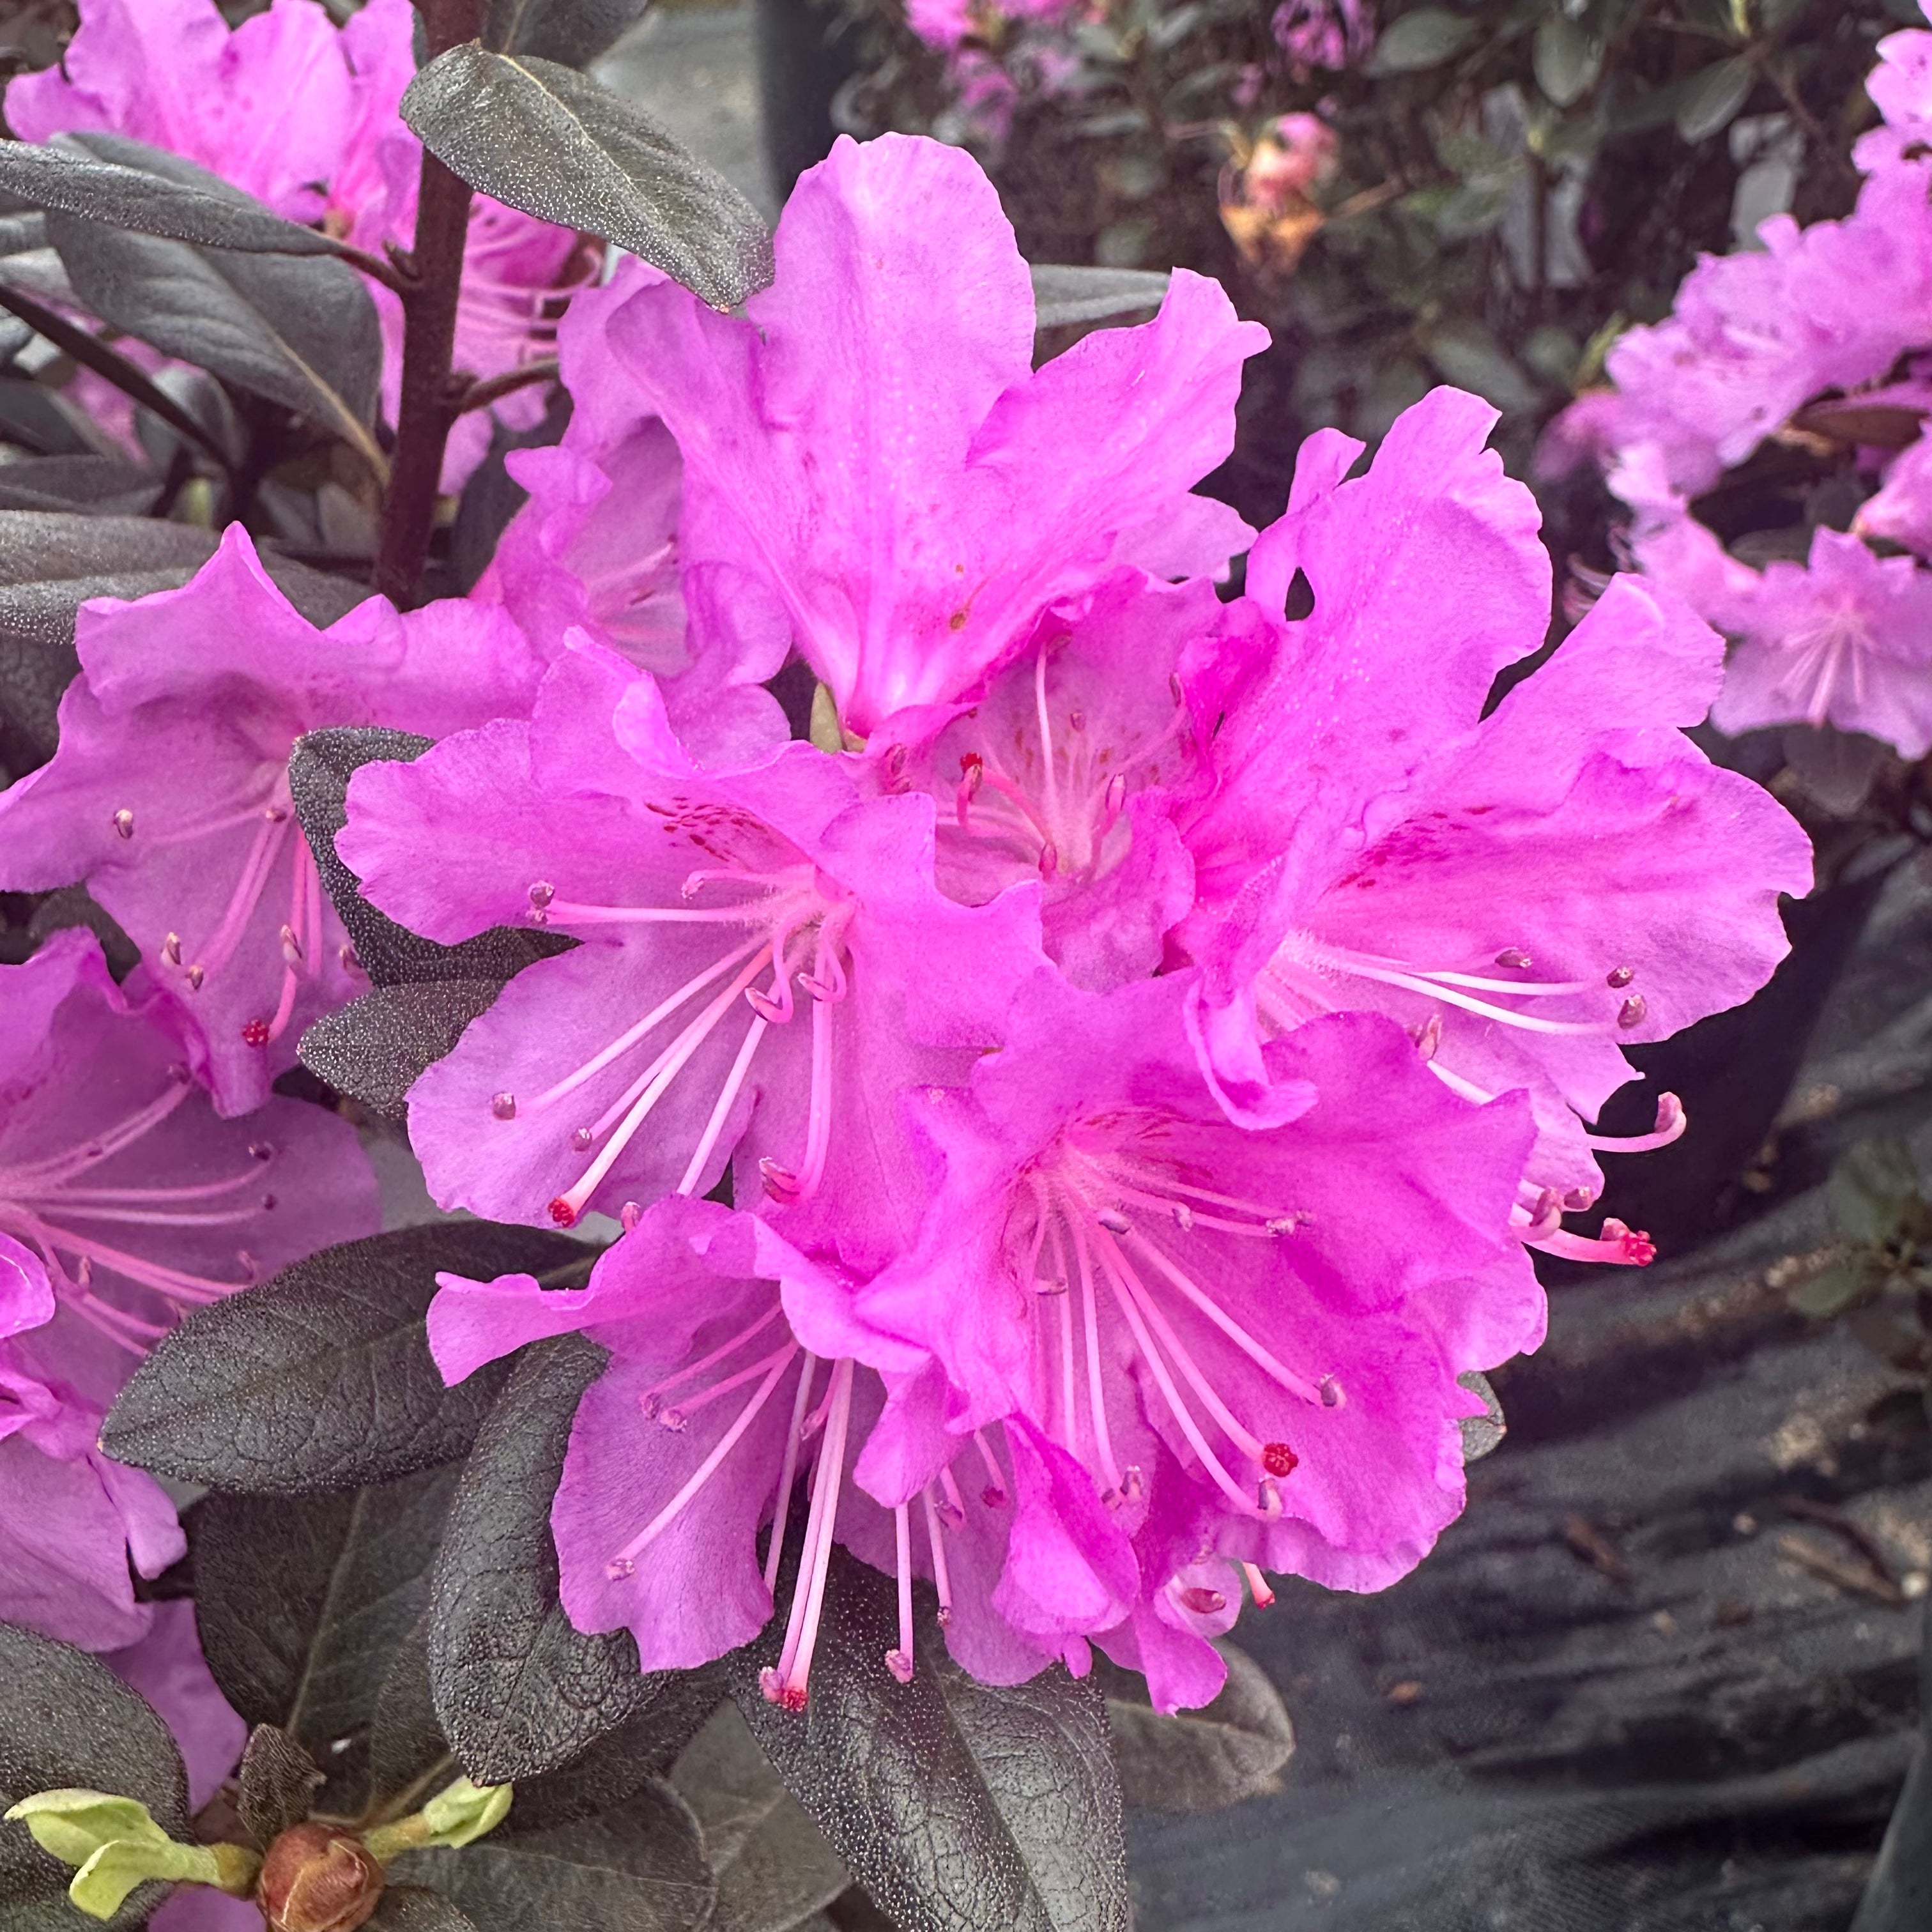 Rhododendron - 3 or 5 gallon container – Lots